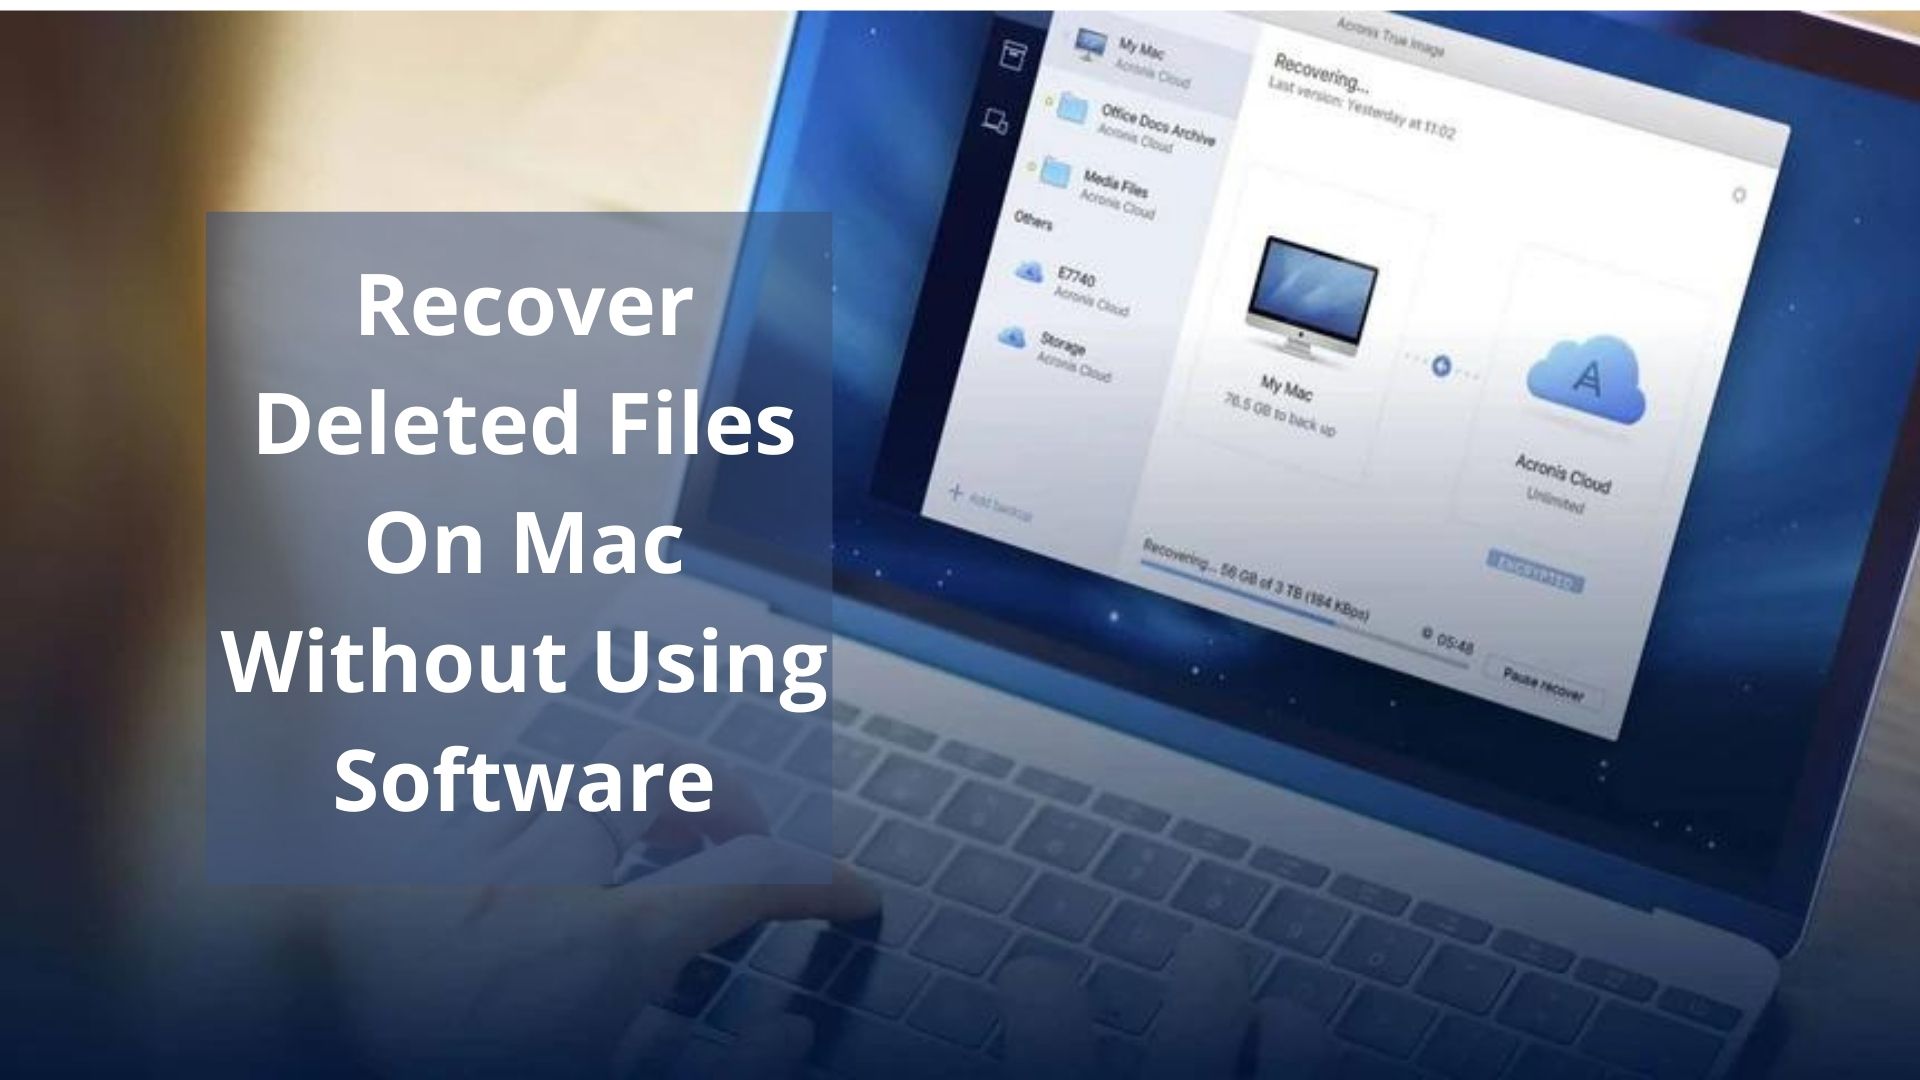 How Can I Recover Deleted Files On My Mac Without Using Software?